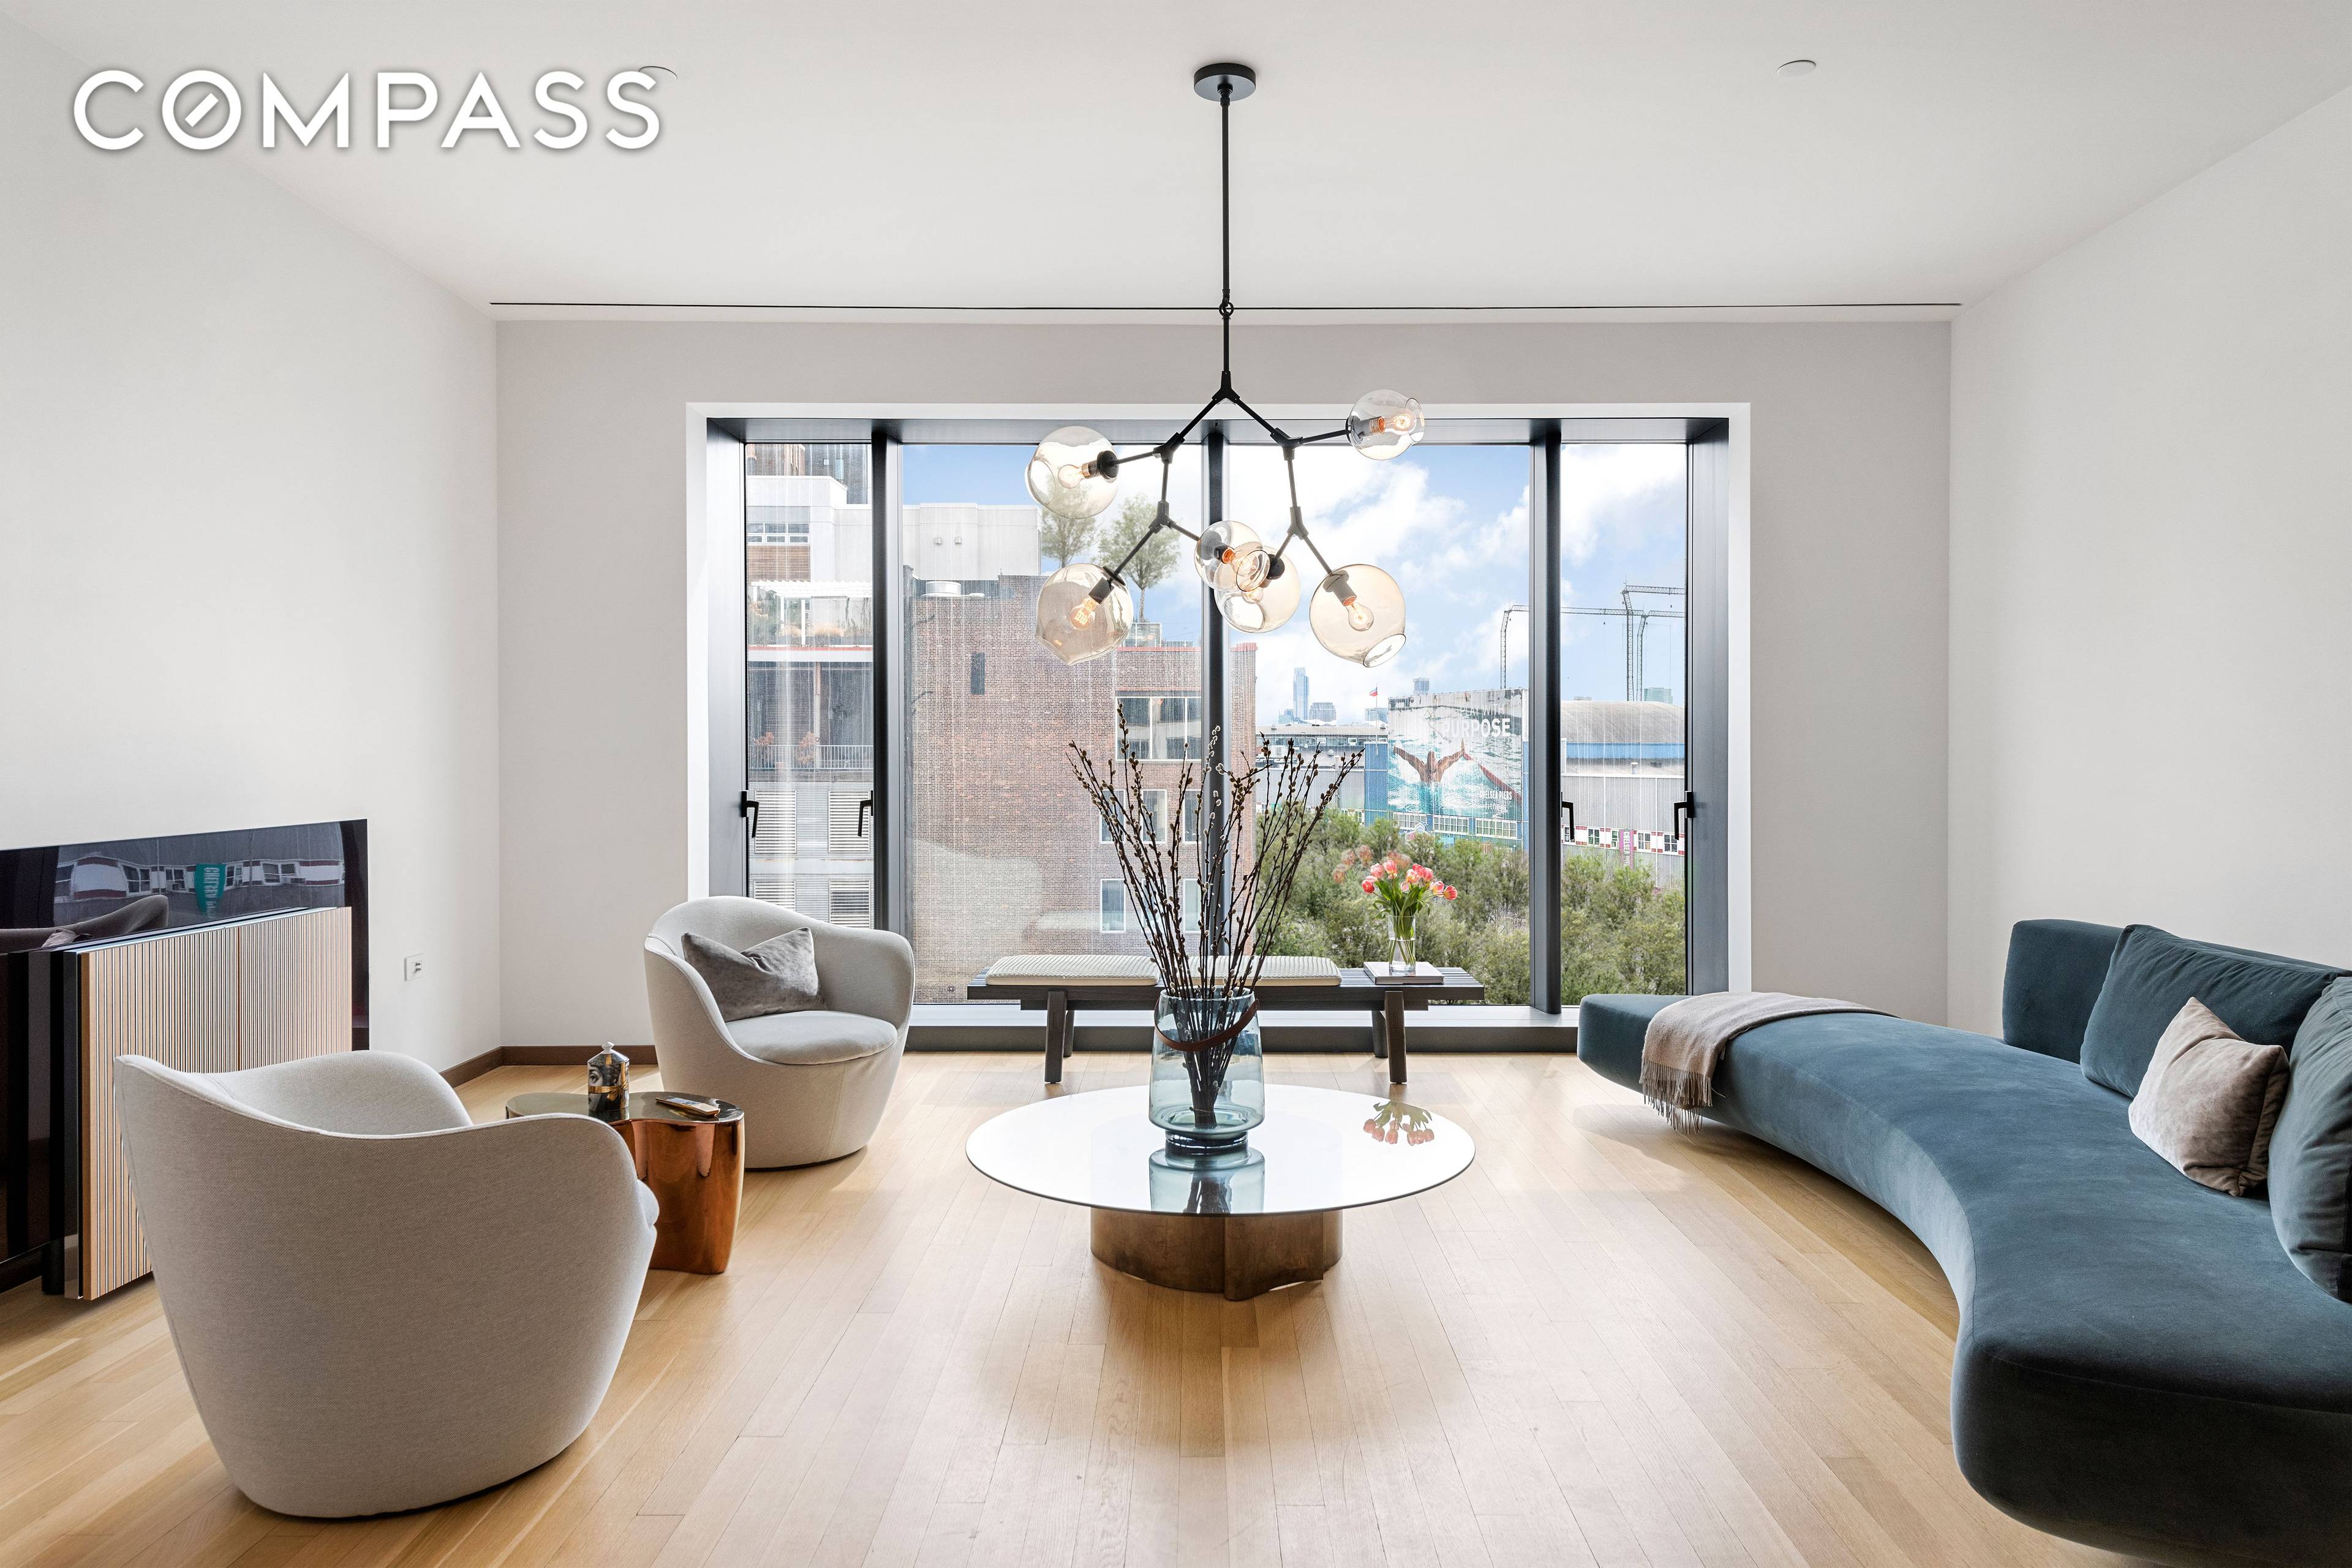 Enjoy living in this expansive, south facing one bedroom home that is defined by its expertly crafted finishes and beautifully proportioned spaces.